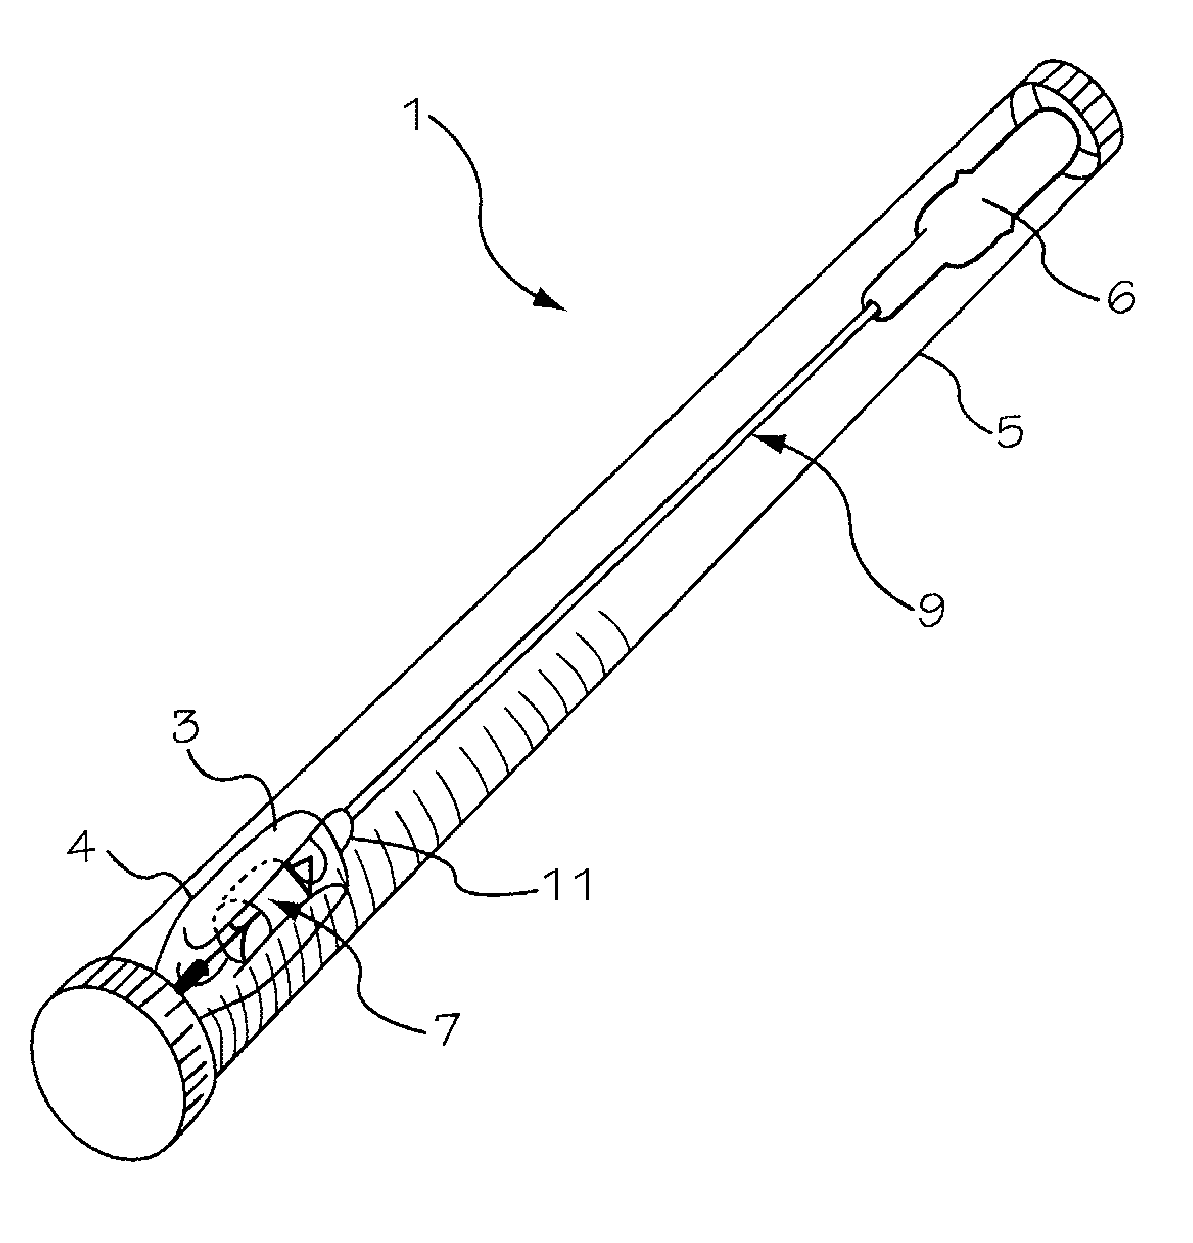 Two-part package for medical implant